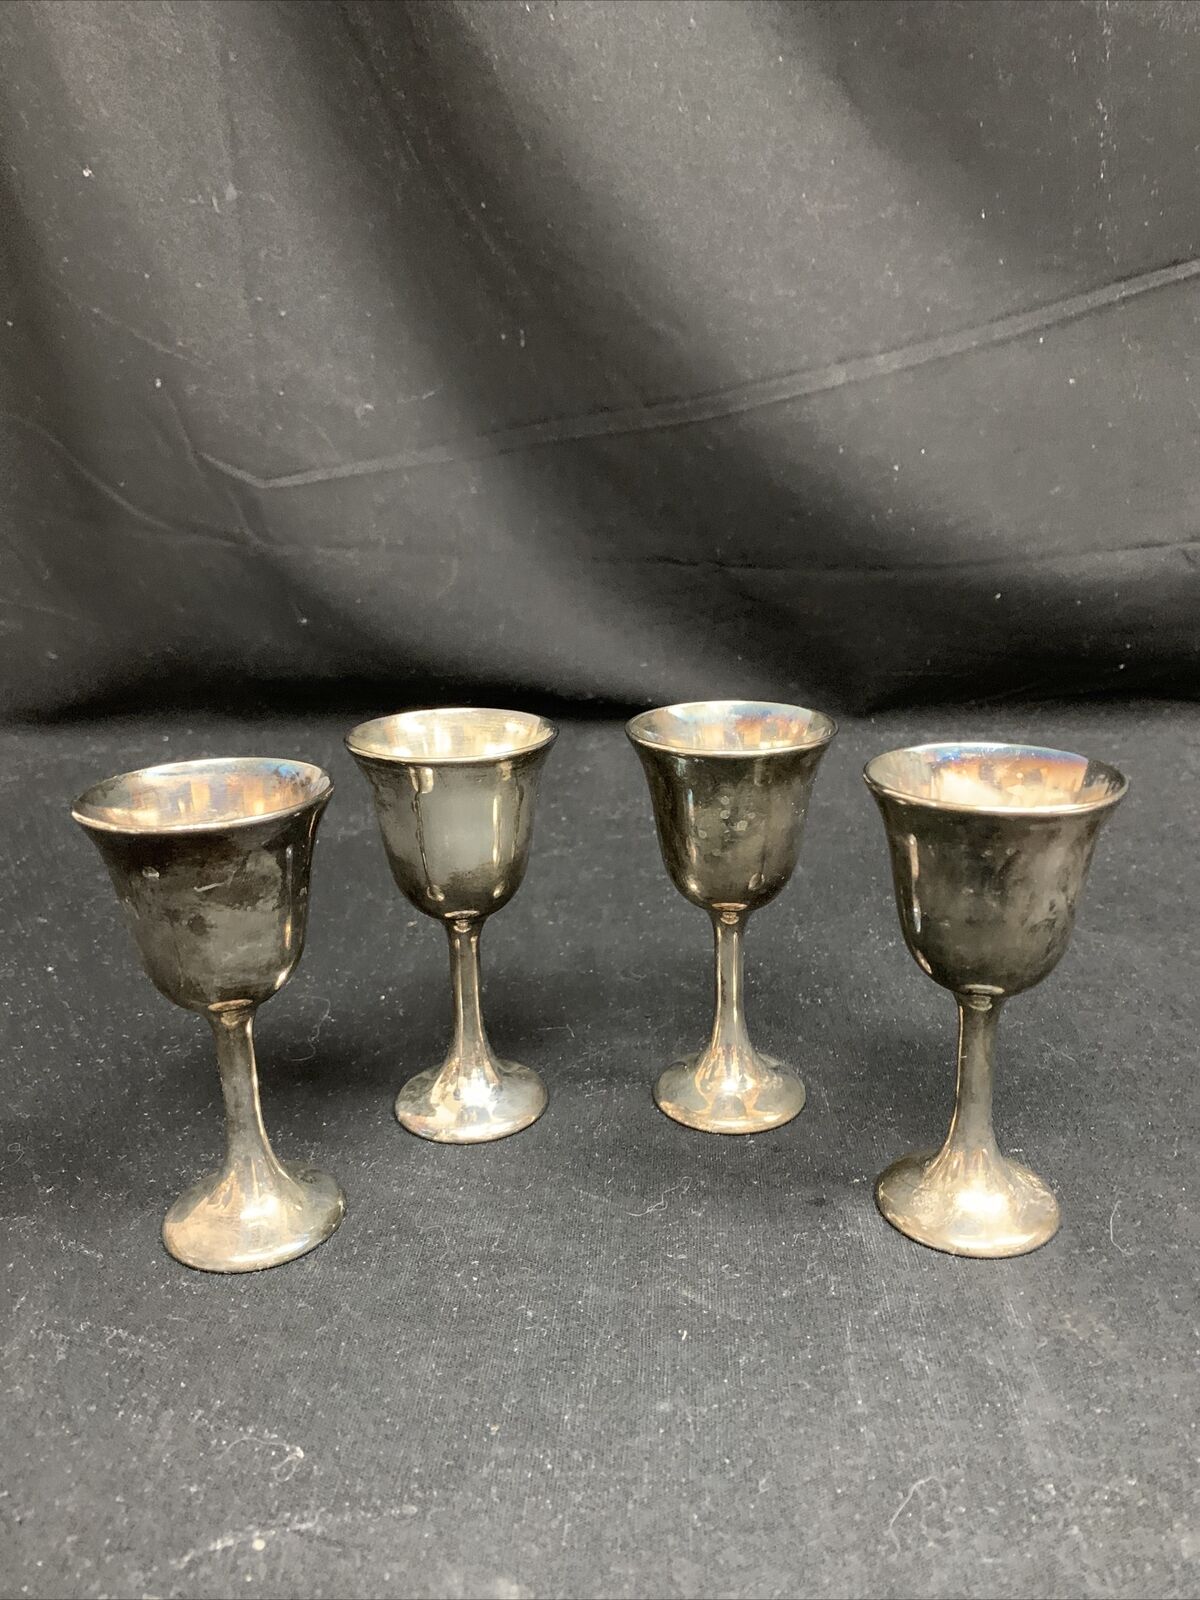 VTG Set Of 4 Rogers Silverplate Goblets/Chalices 3.75”